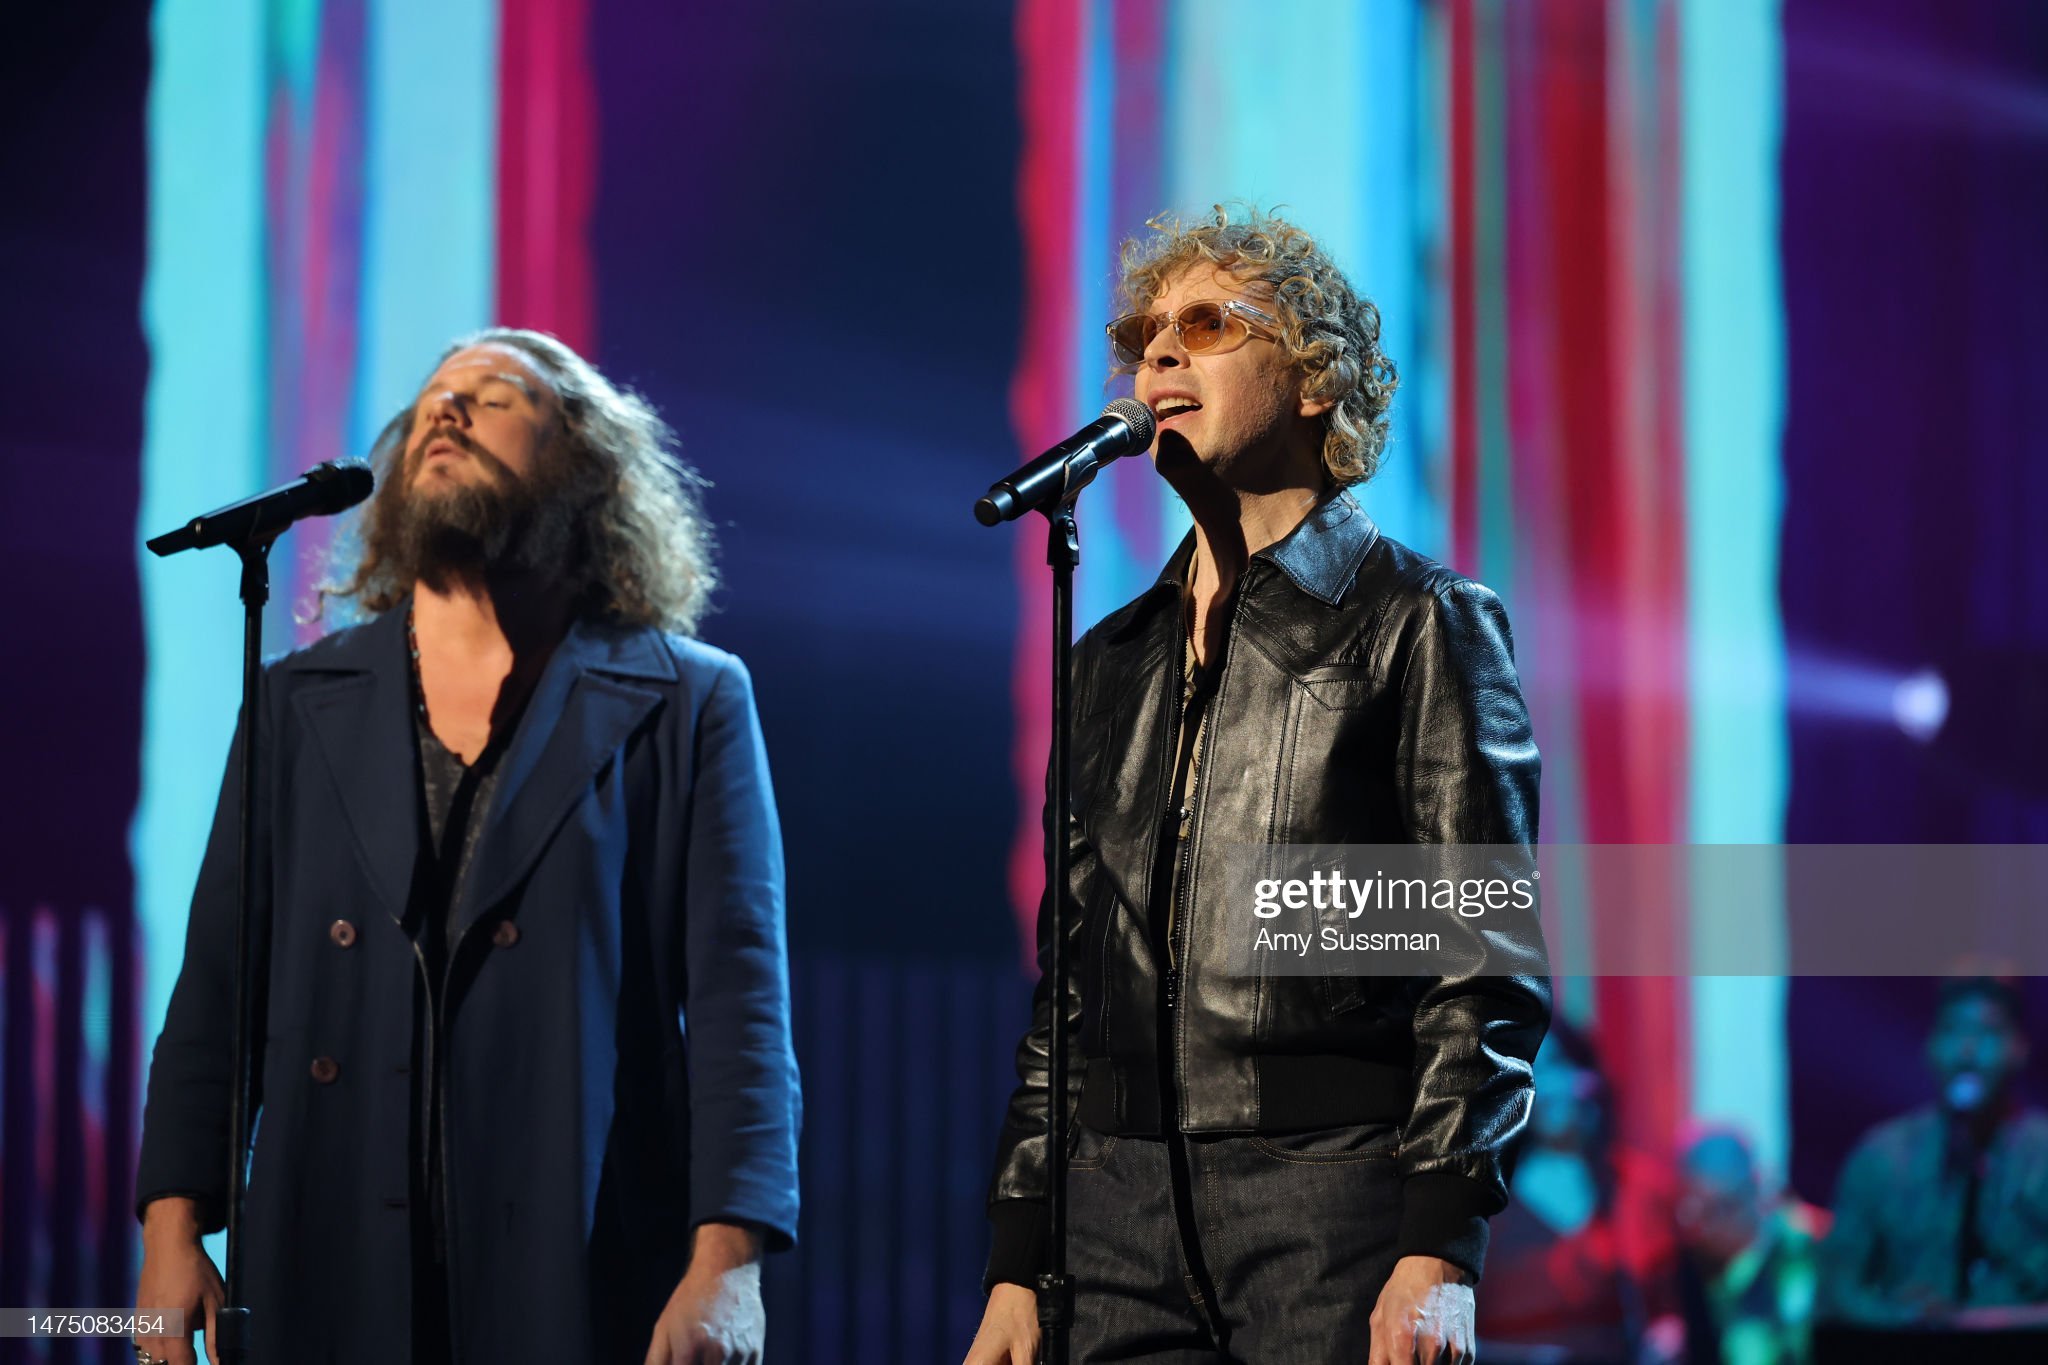 gettyimages-1475083454-2048x2048.jpg